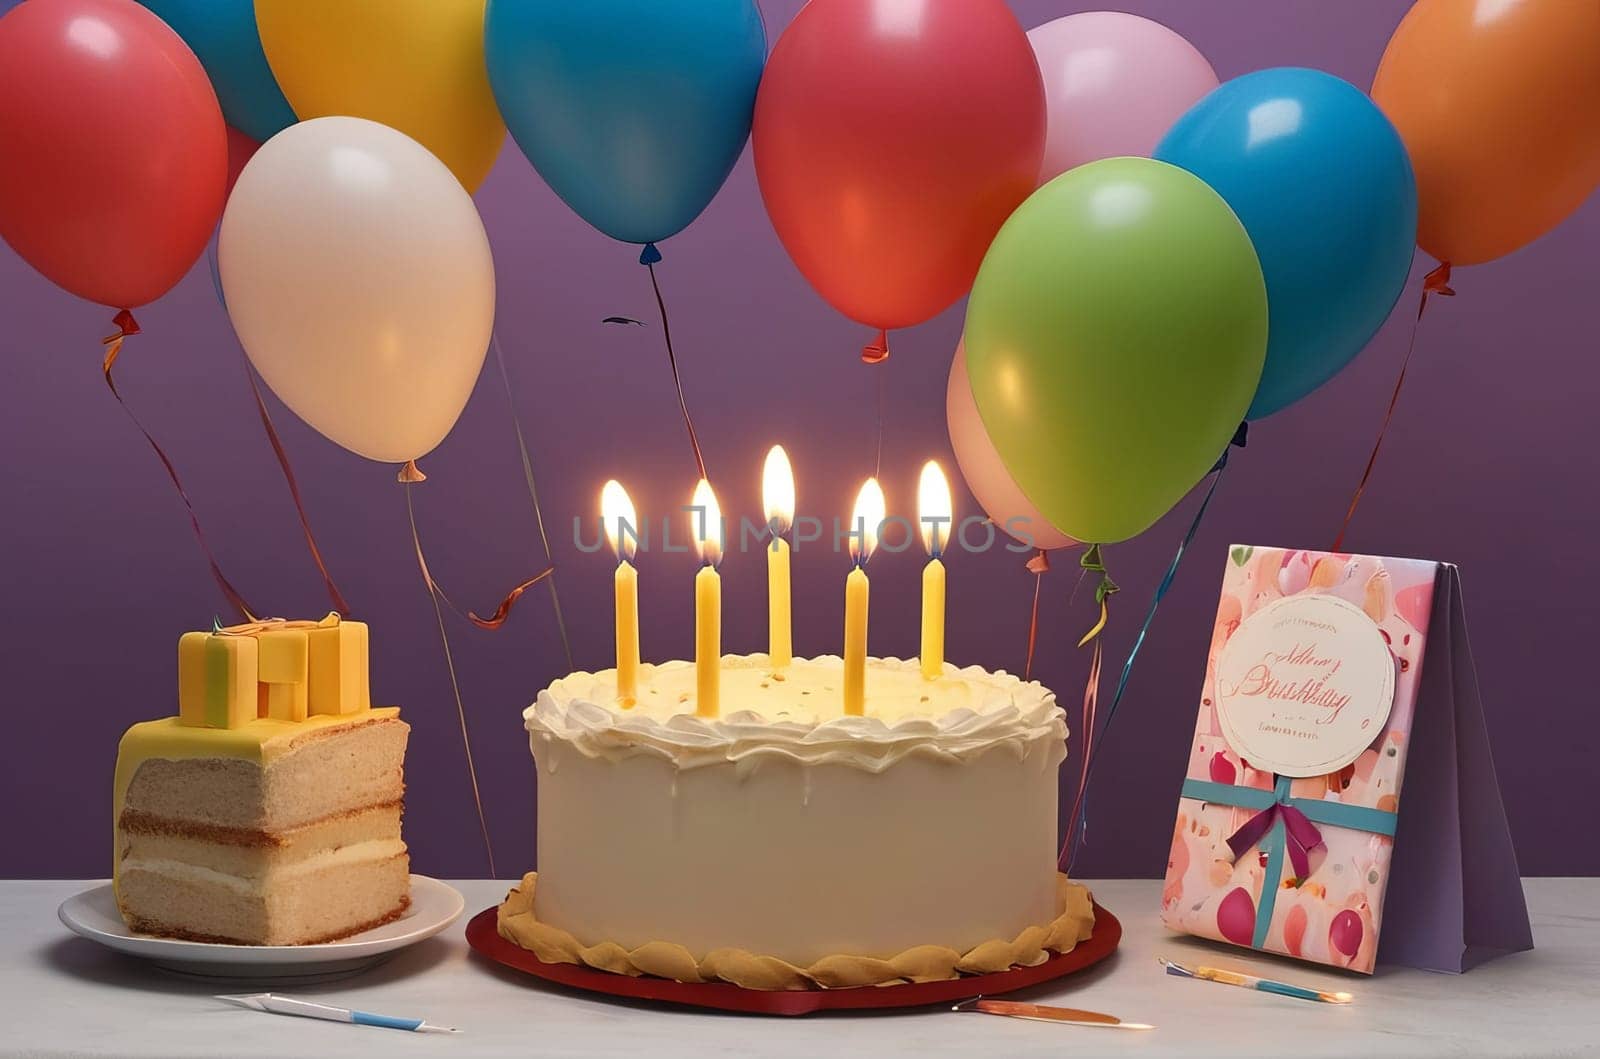 Birthday Bliss: A festive cake adorned with candles, set in a room decorated with balloons, radiating birthday joy and celebration. by Annu1tochka